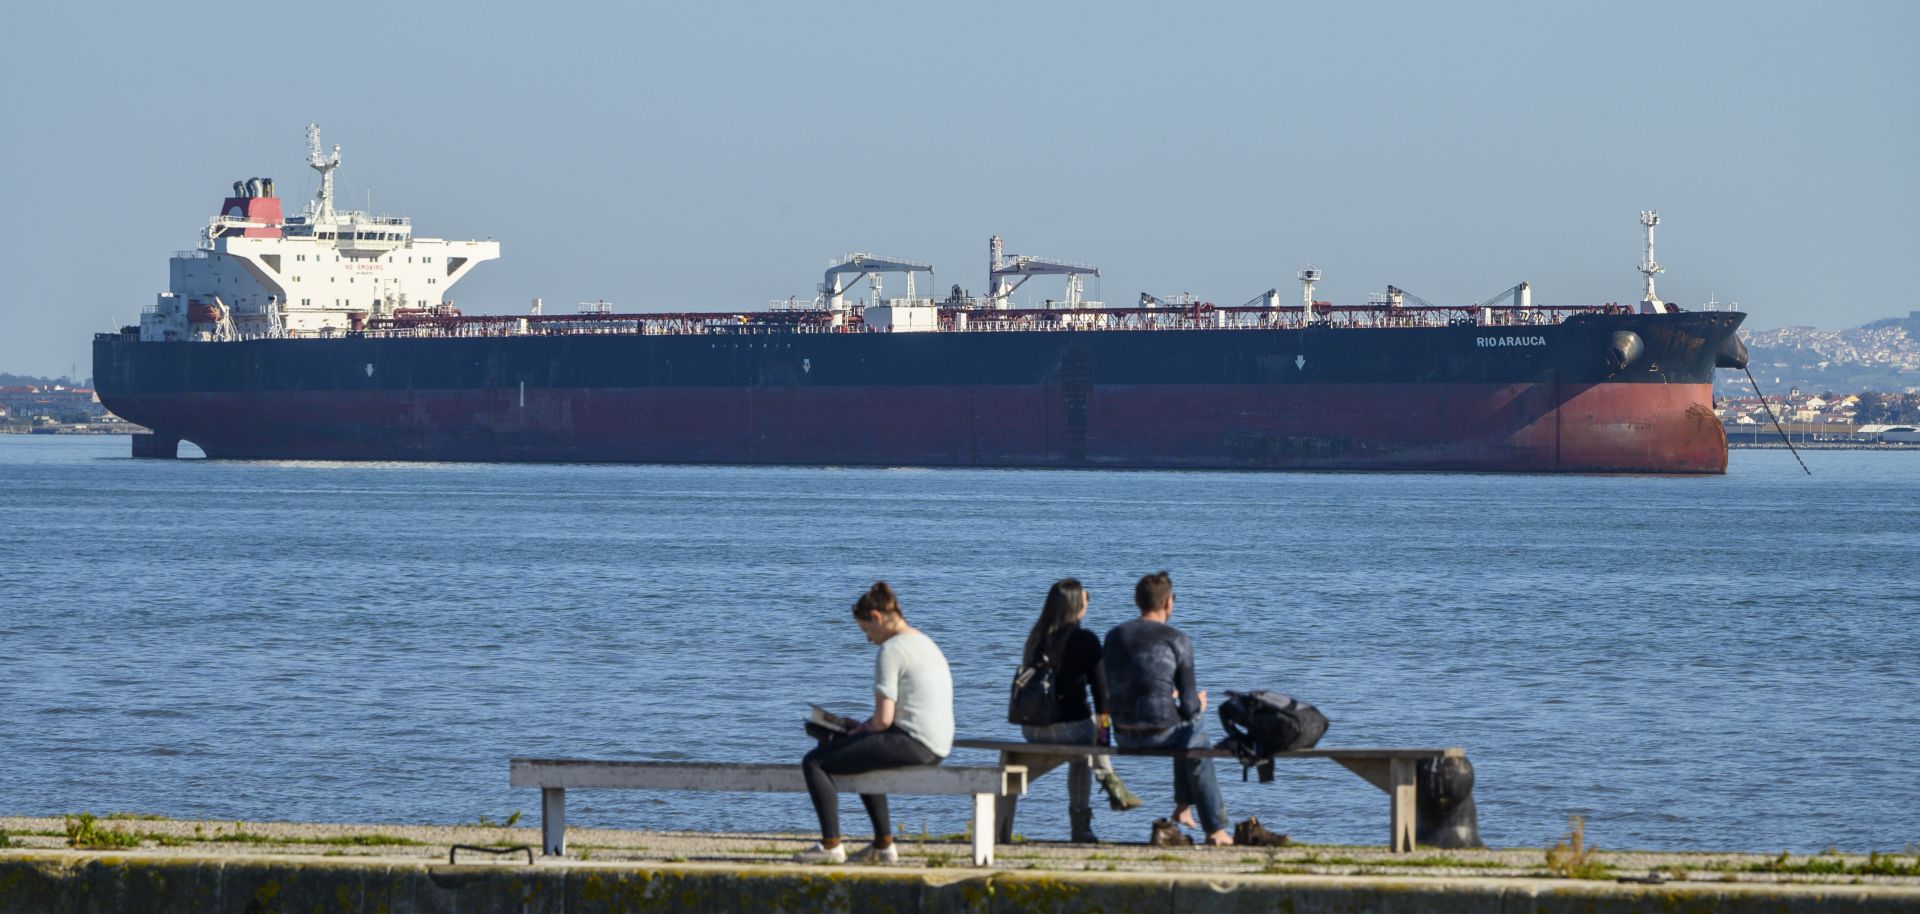 People relax on the bank of the Tagus River where Venezuelan PDVSA oil tanker Rio Arauca lies at anchor, having been impounded by Portuguese authorities for nearly two years due to unpaid debt, March 9.  